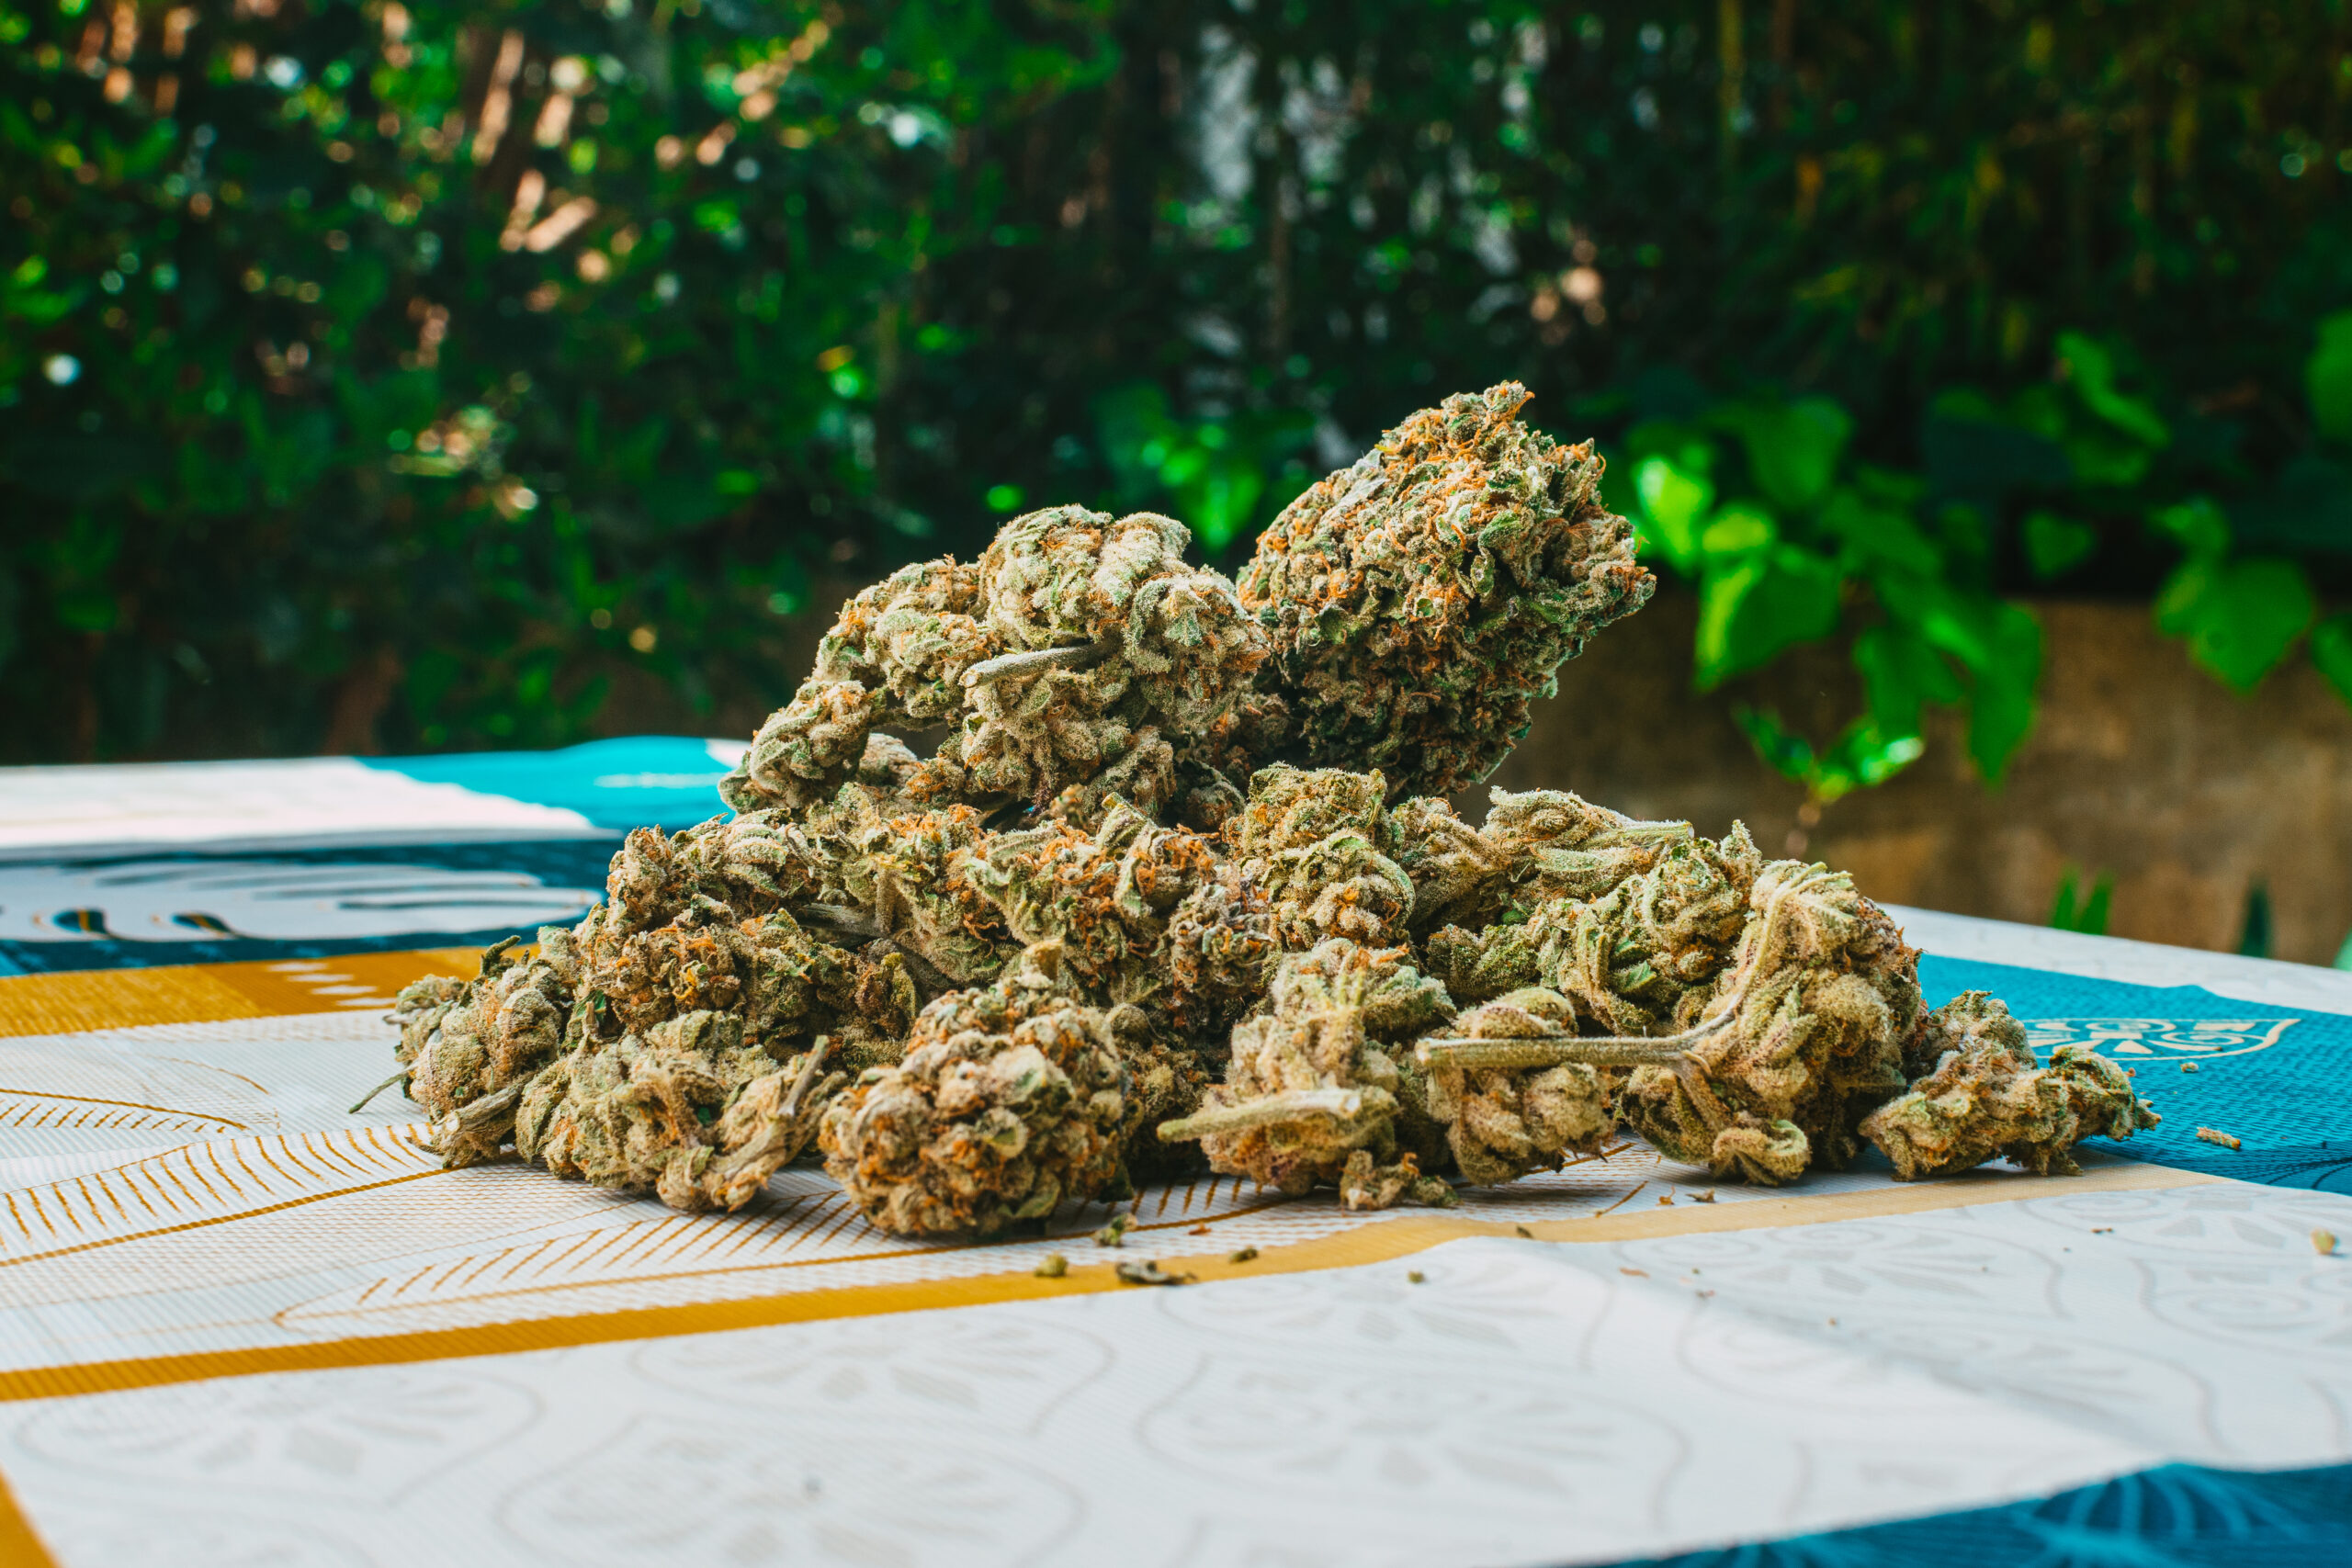 Closeup shot of weed buds on the table outdoors